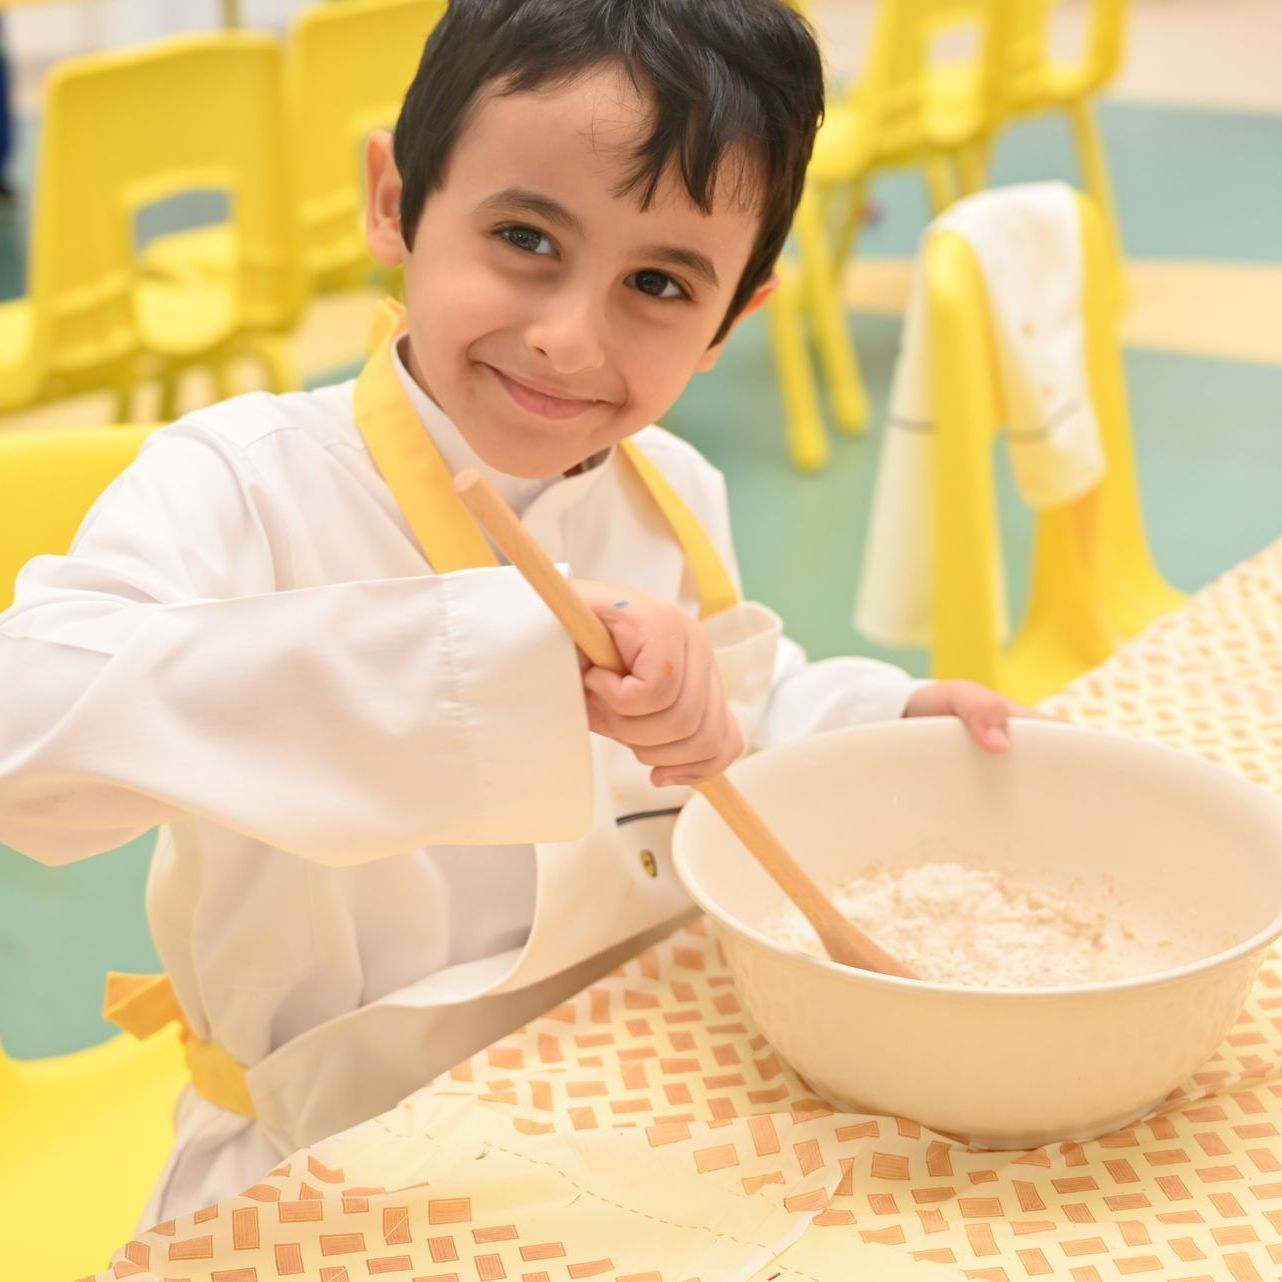 A young boy is holding a wooden spoon over a bowl of food